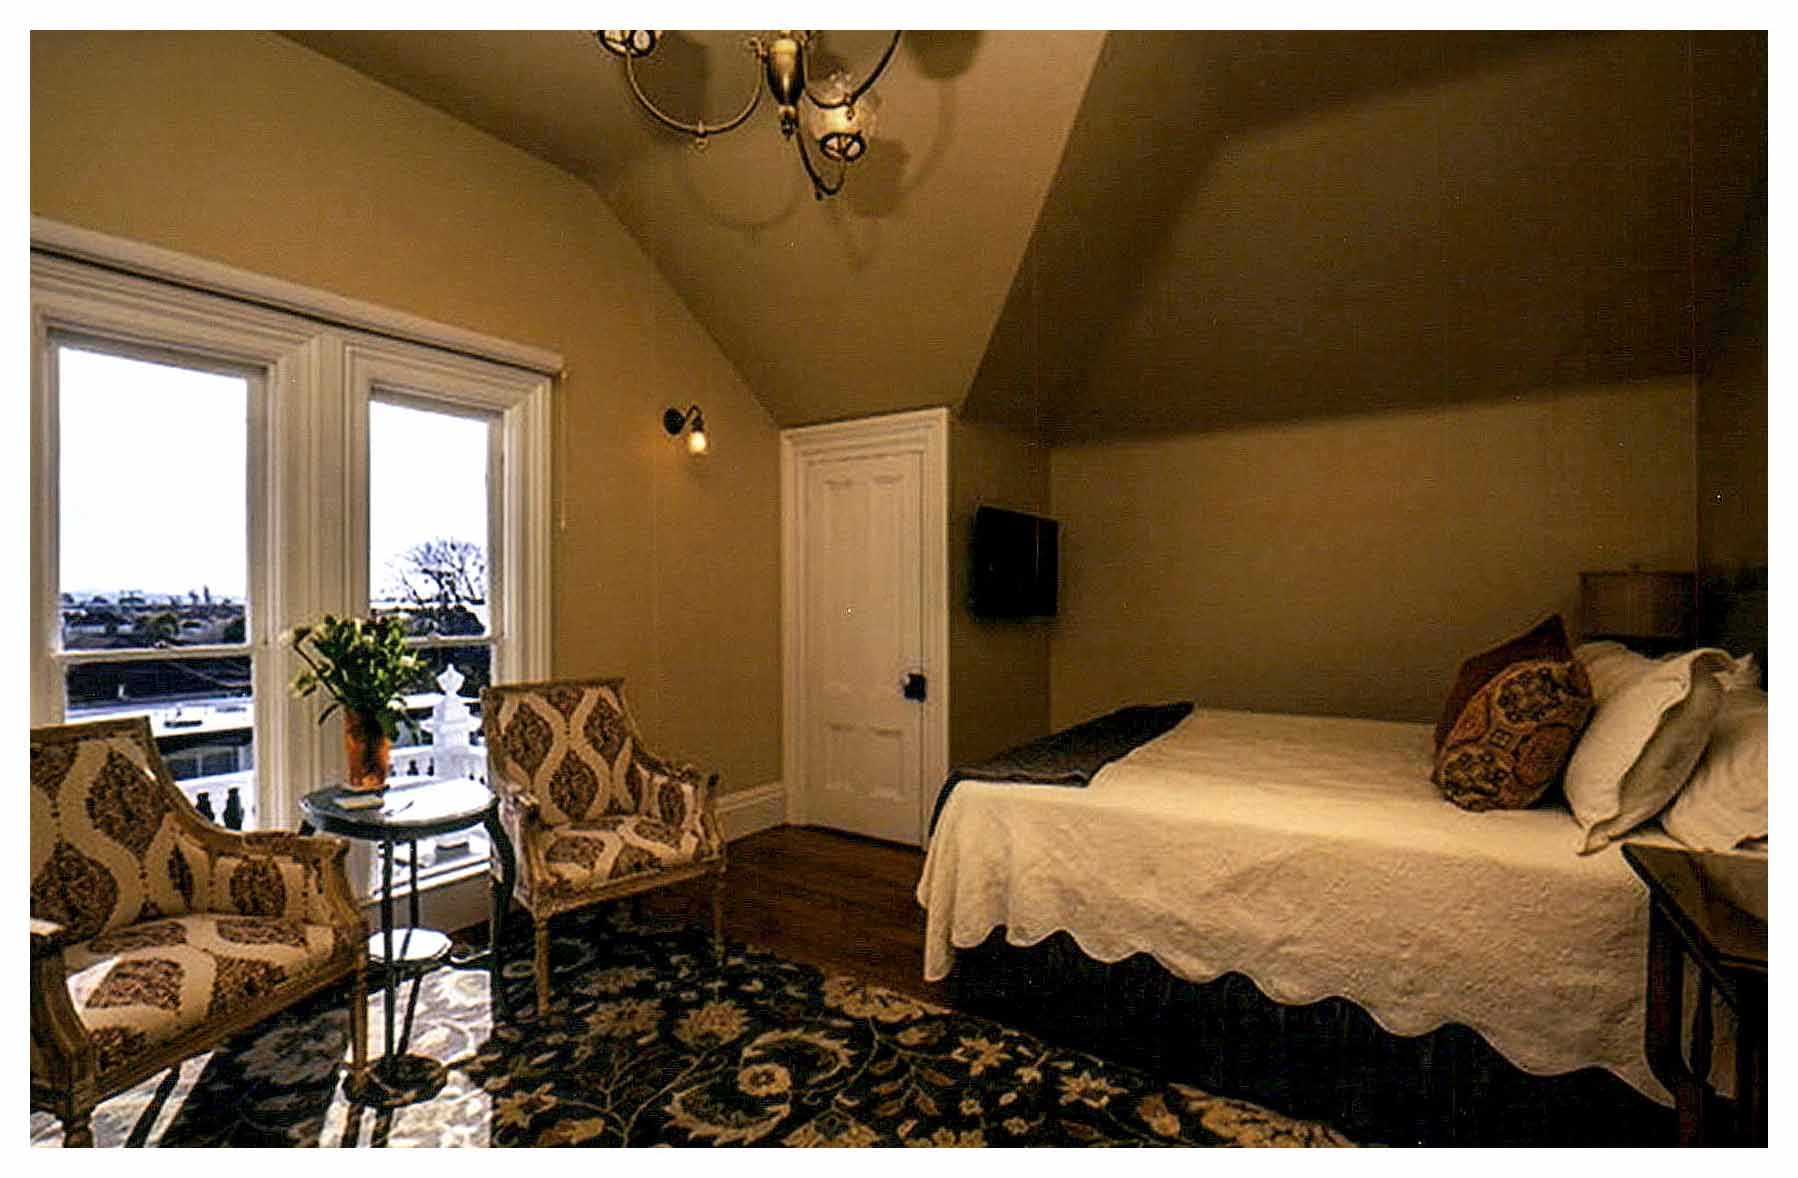 After: bedroom with mirrored plan to bedroom above including a closet under a hipped ceiling. Walls are painted beige. windows have low sills near the floor, providing much light.